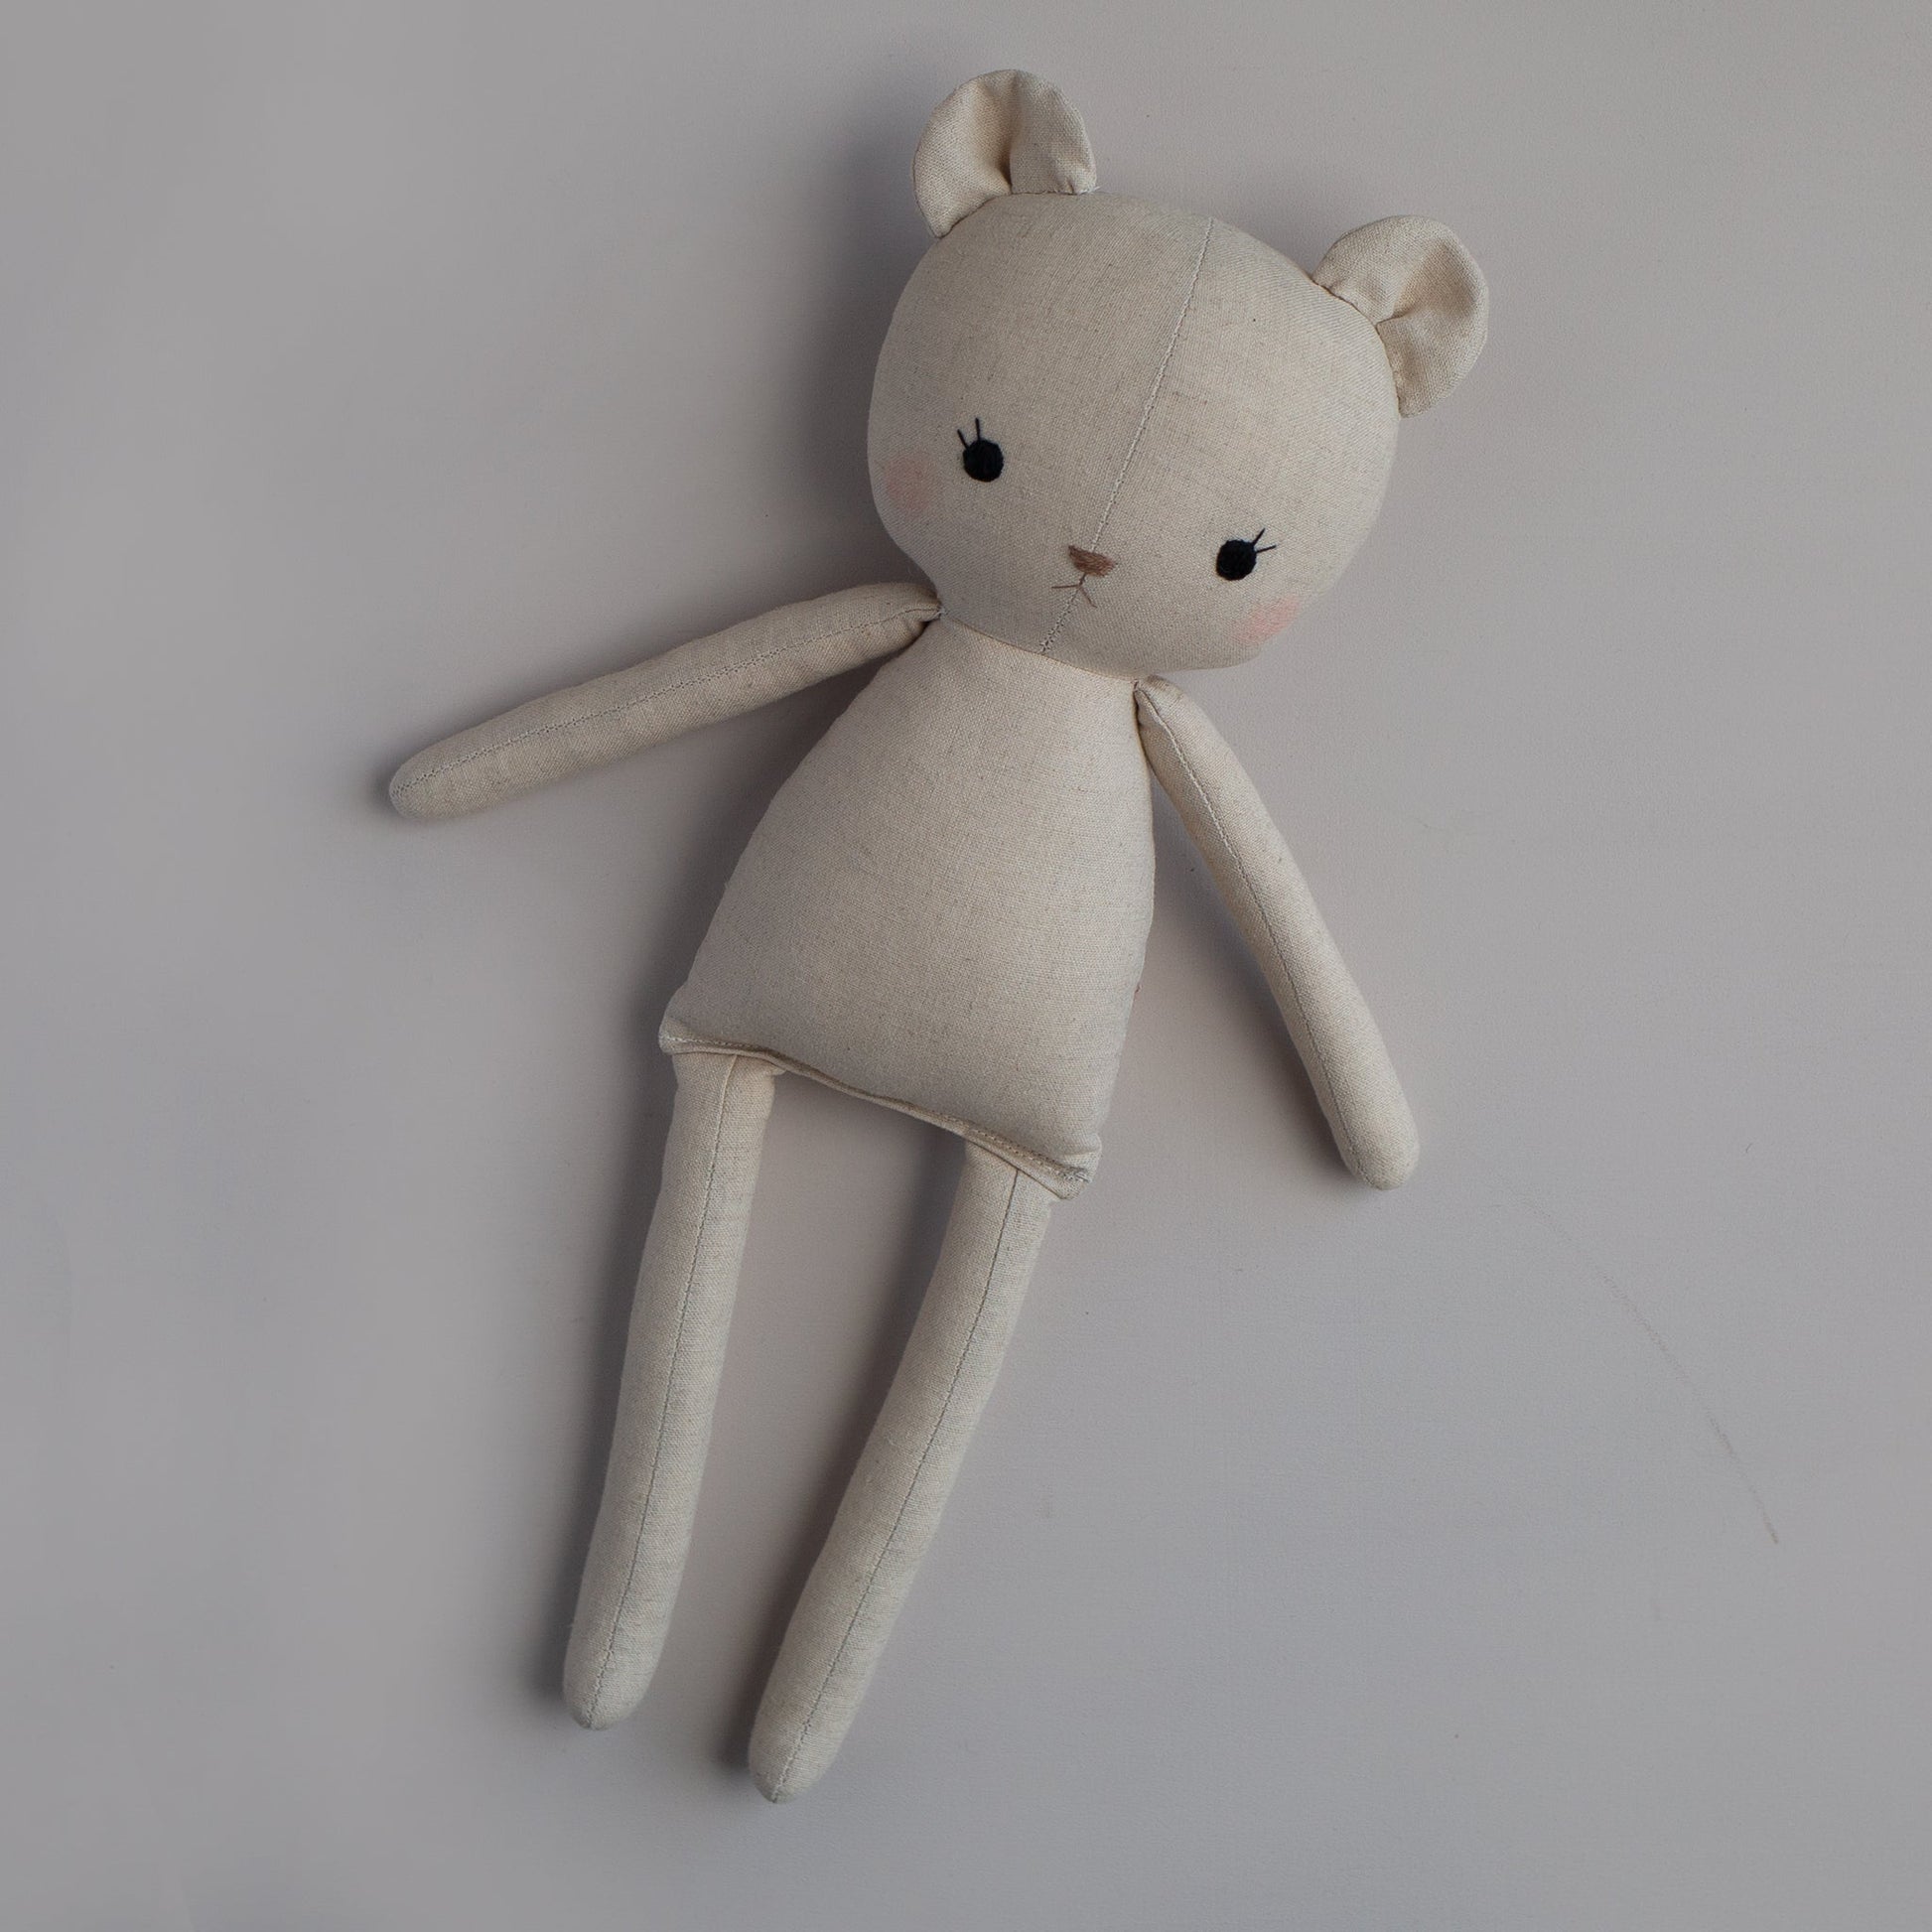 Teddy Bear Sewing Pattern And Tutorial For Beginners, Stuffe - Inspire  Uplift